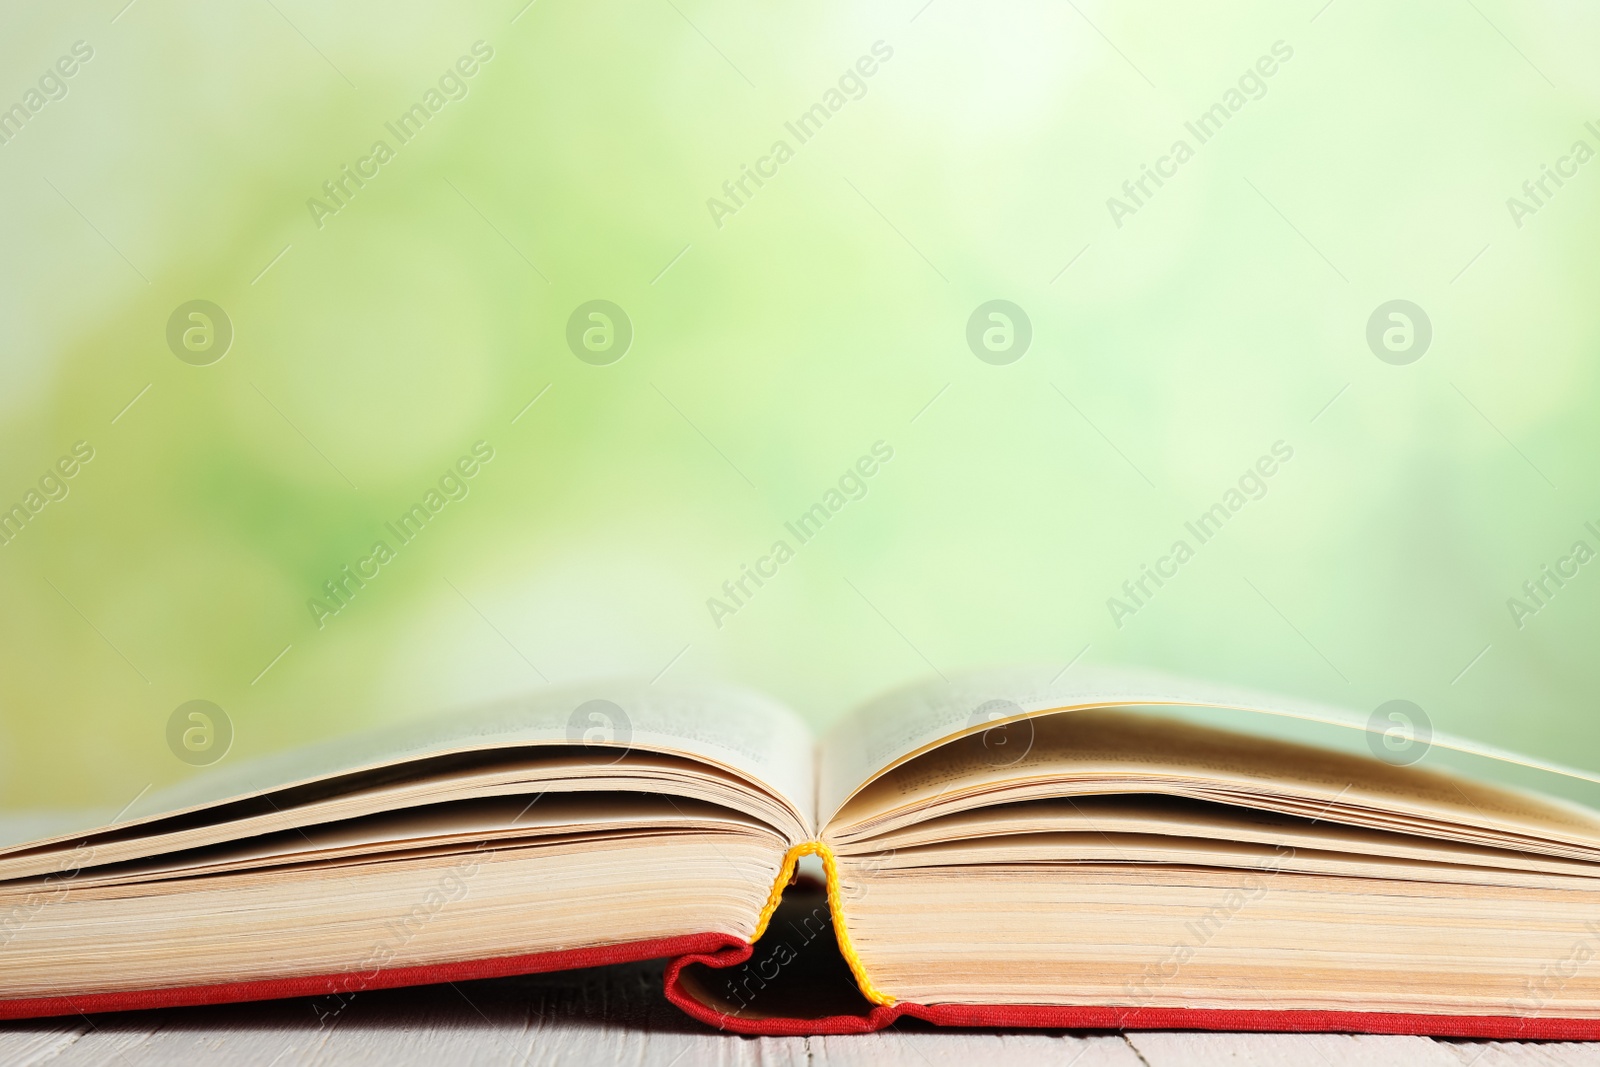 Photo of Open book on white wooden table against blurred green background, closeup. Space for text